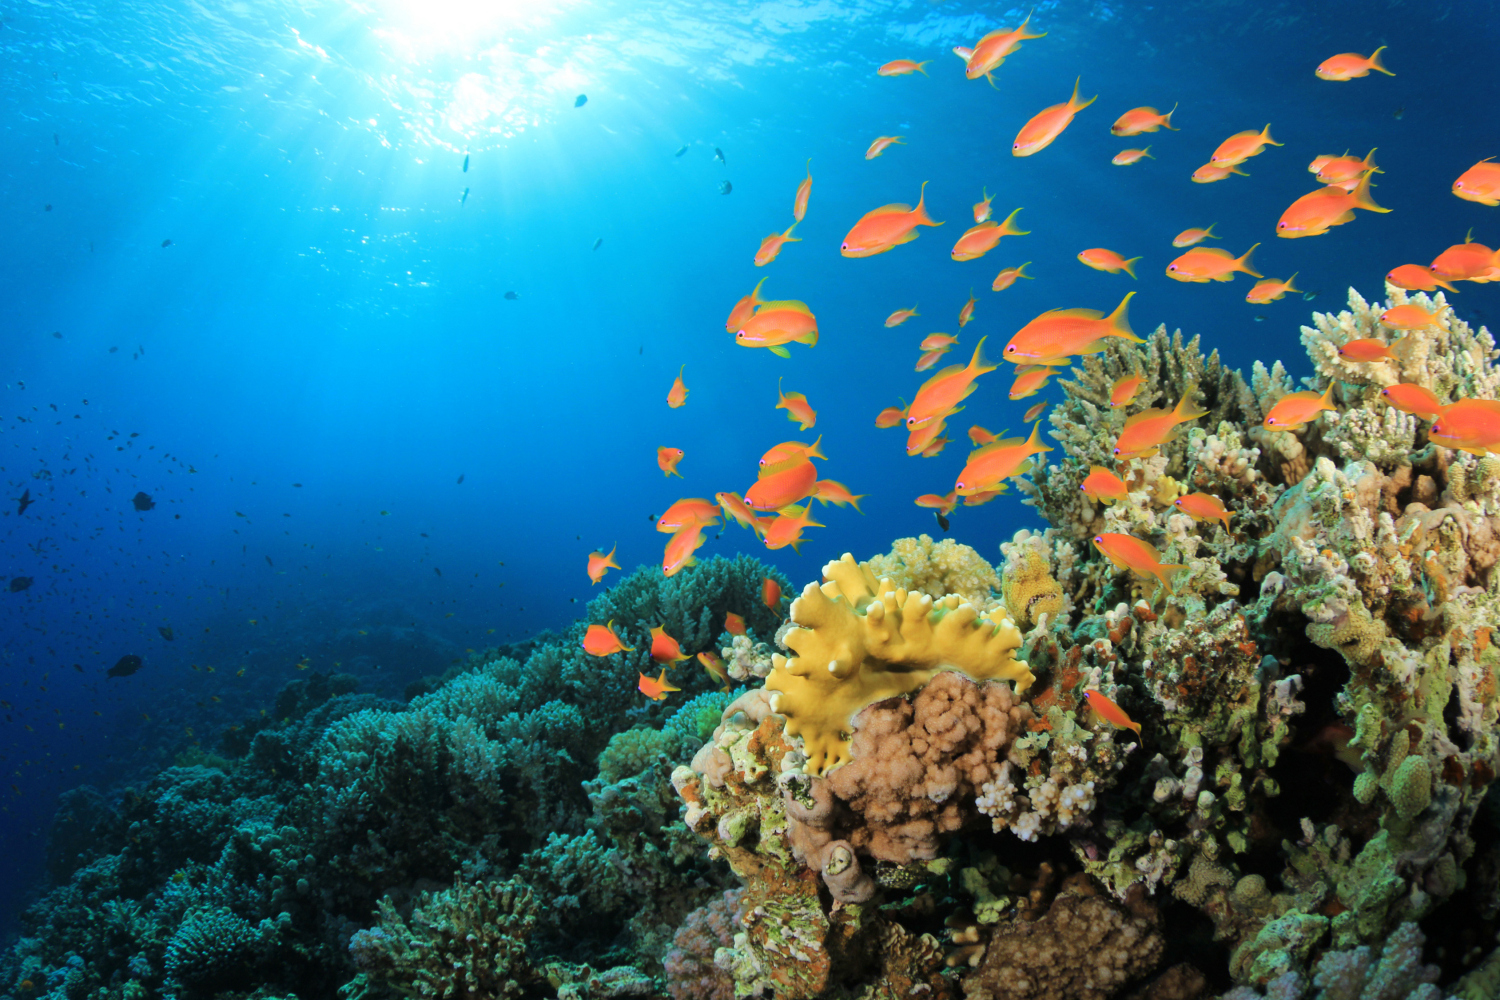 Most coral reefs are at risk unless climate change is drastically limited